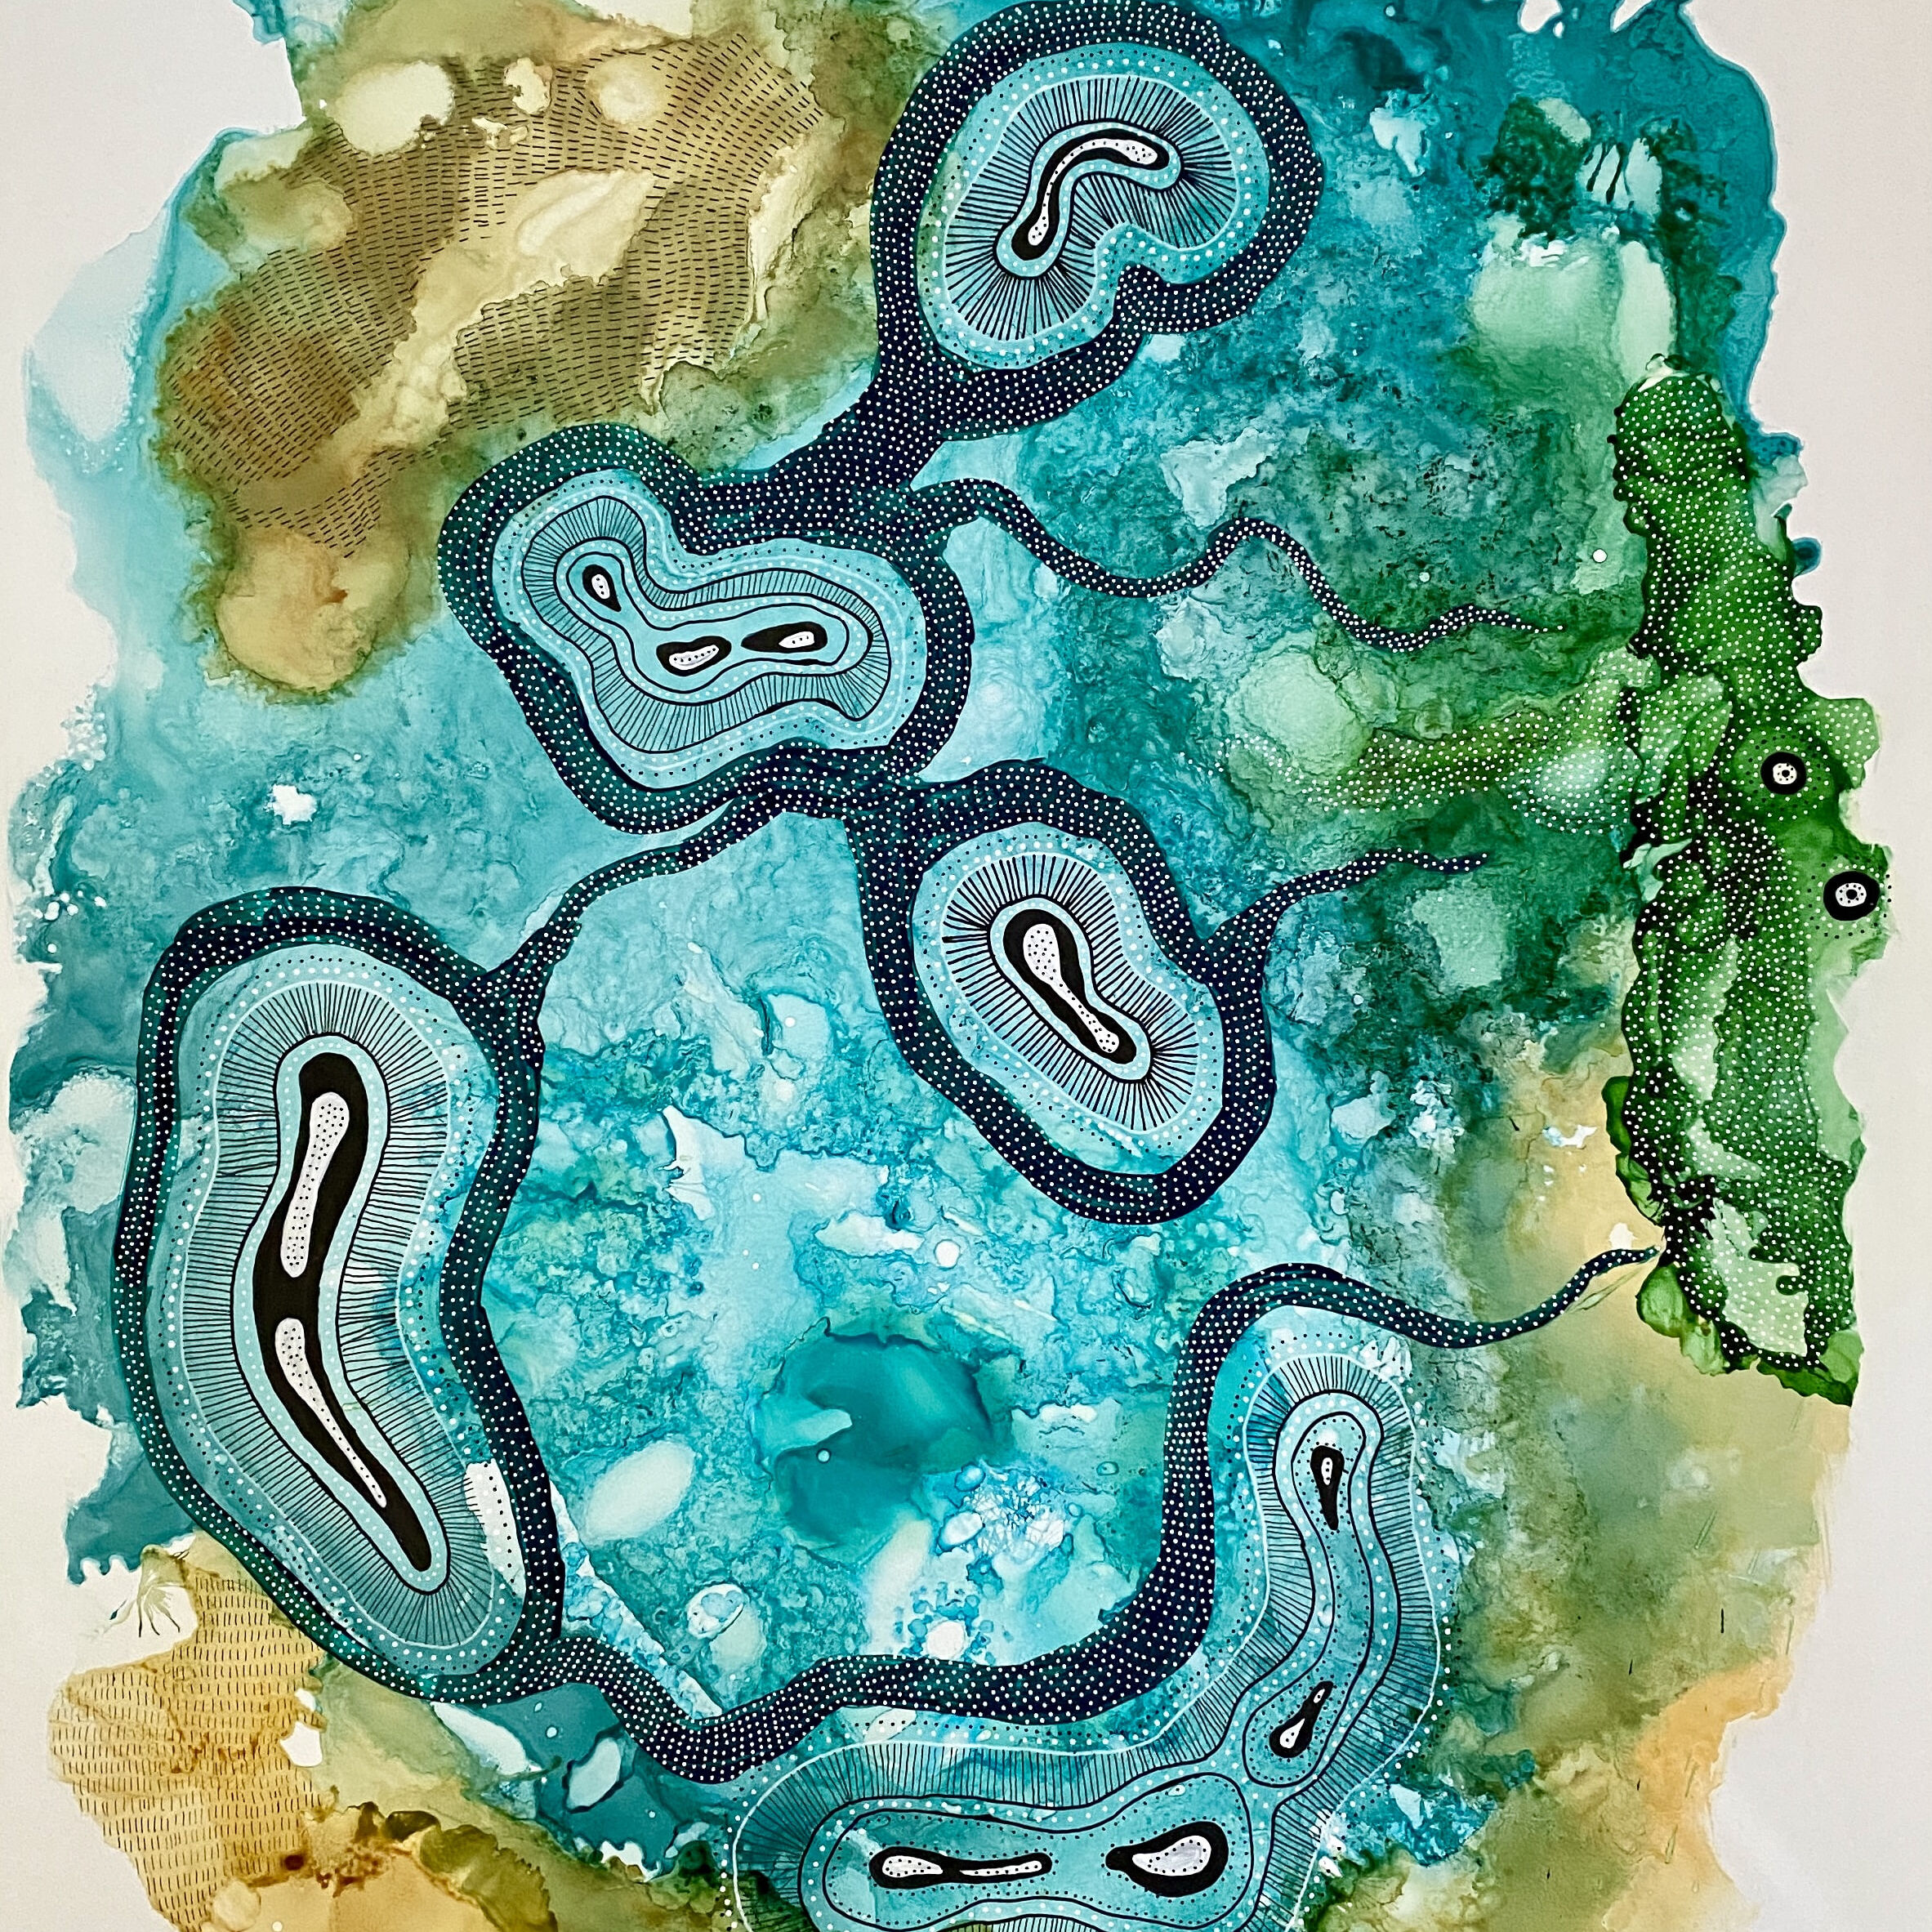 The_Shallow_Shoal_mixed_media_40cmx60cm_Wendy_Peters